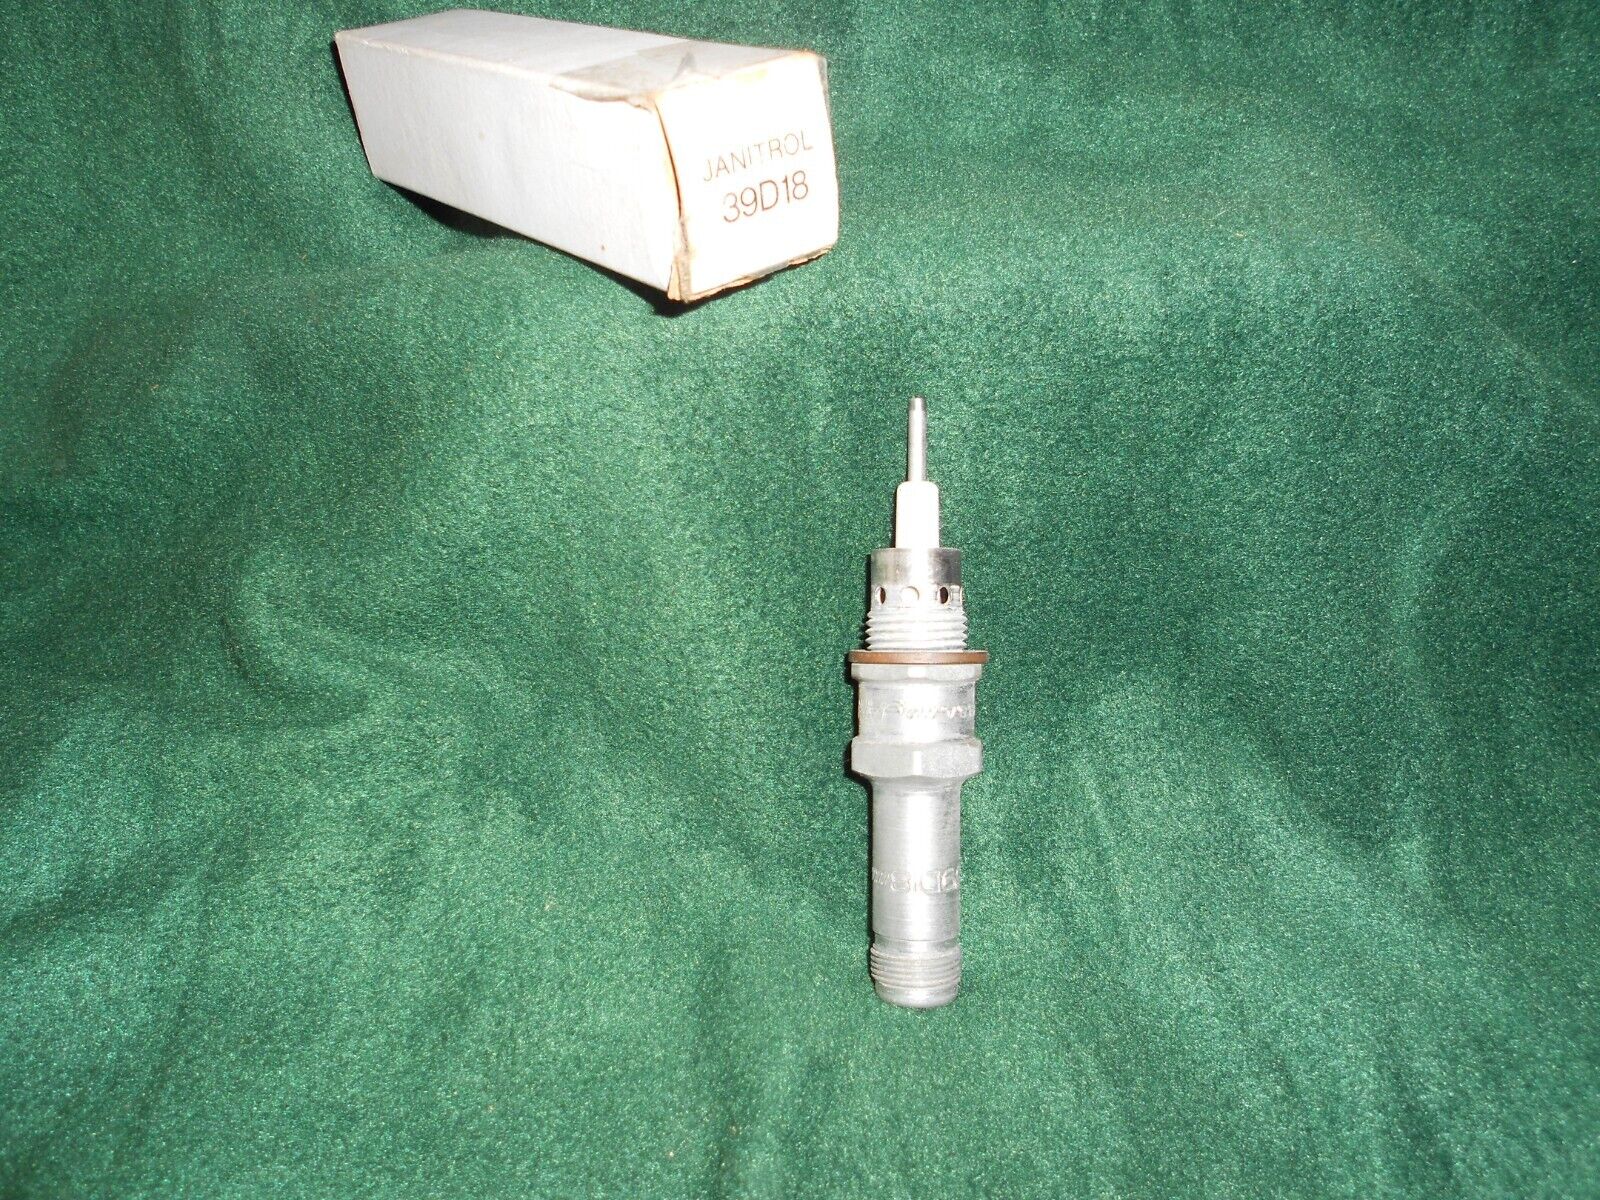 JANITROL NEW IGNITOR P/N 39D18 (NOS)